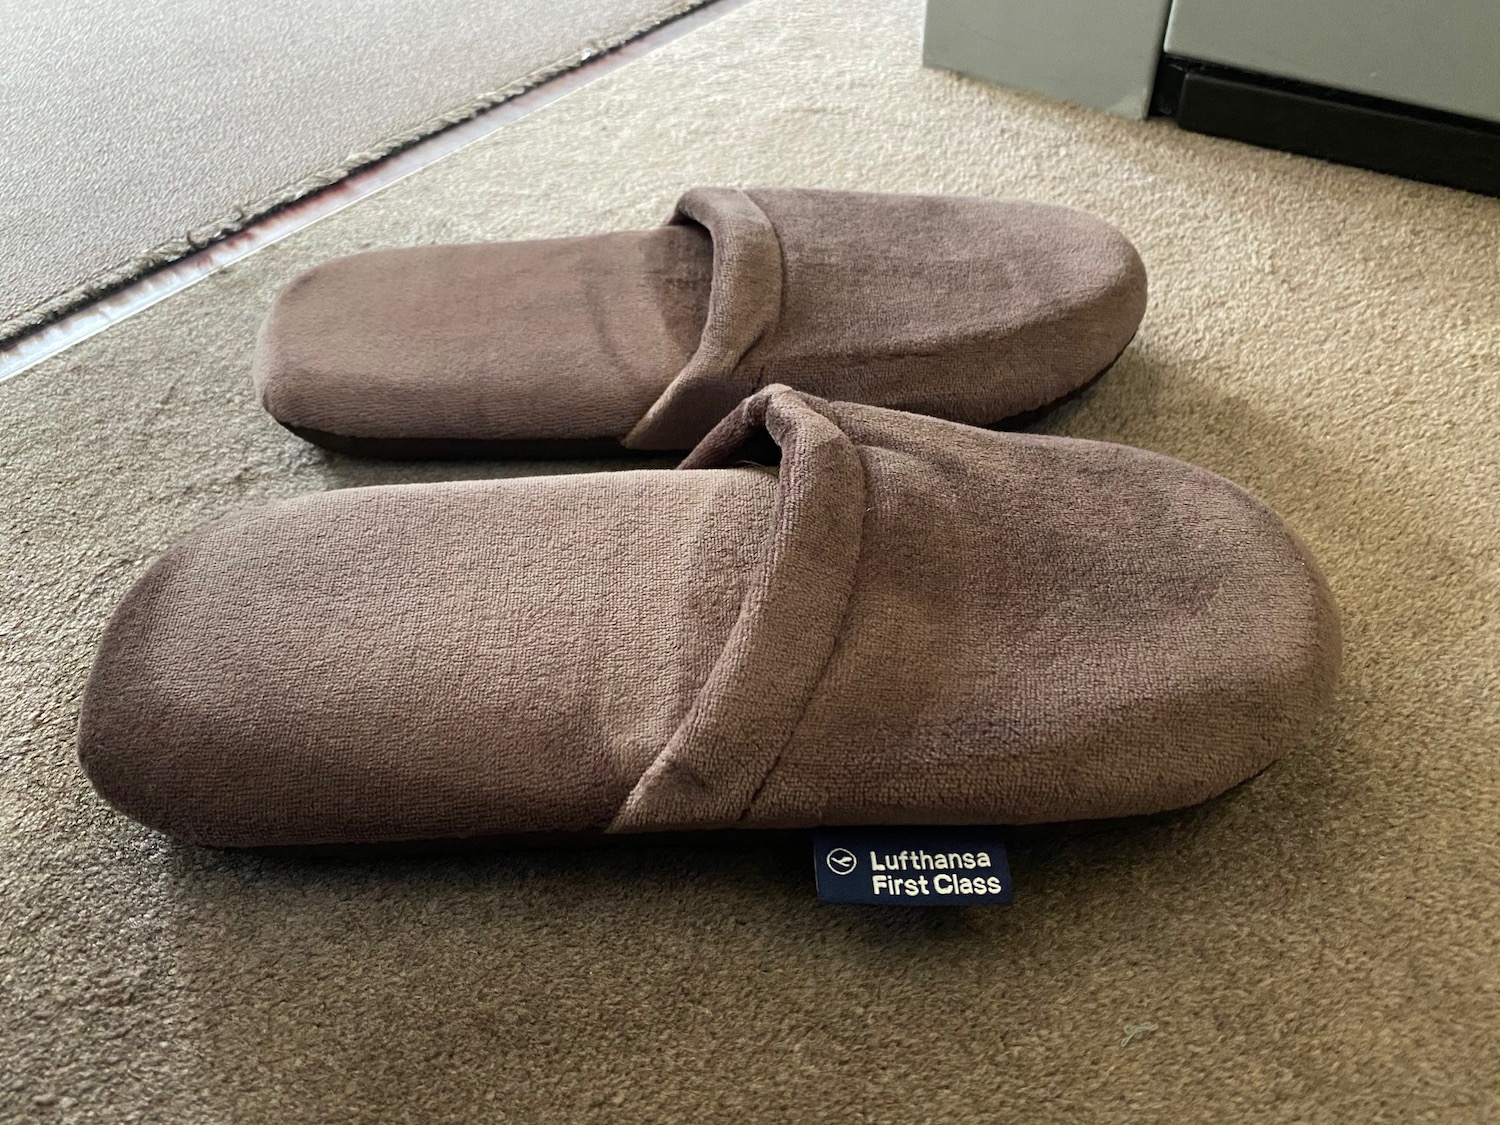 a pair of slippers on the floor